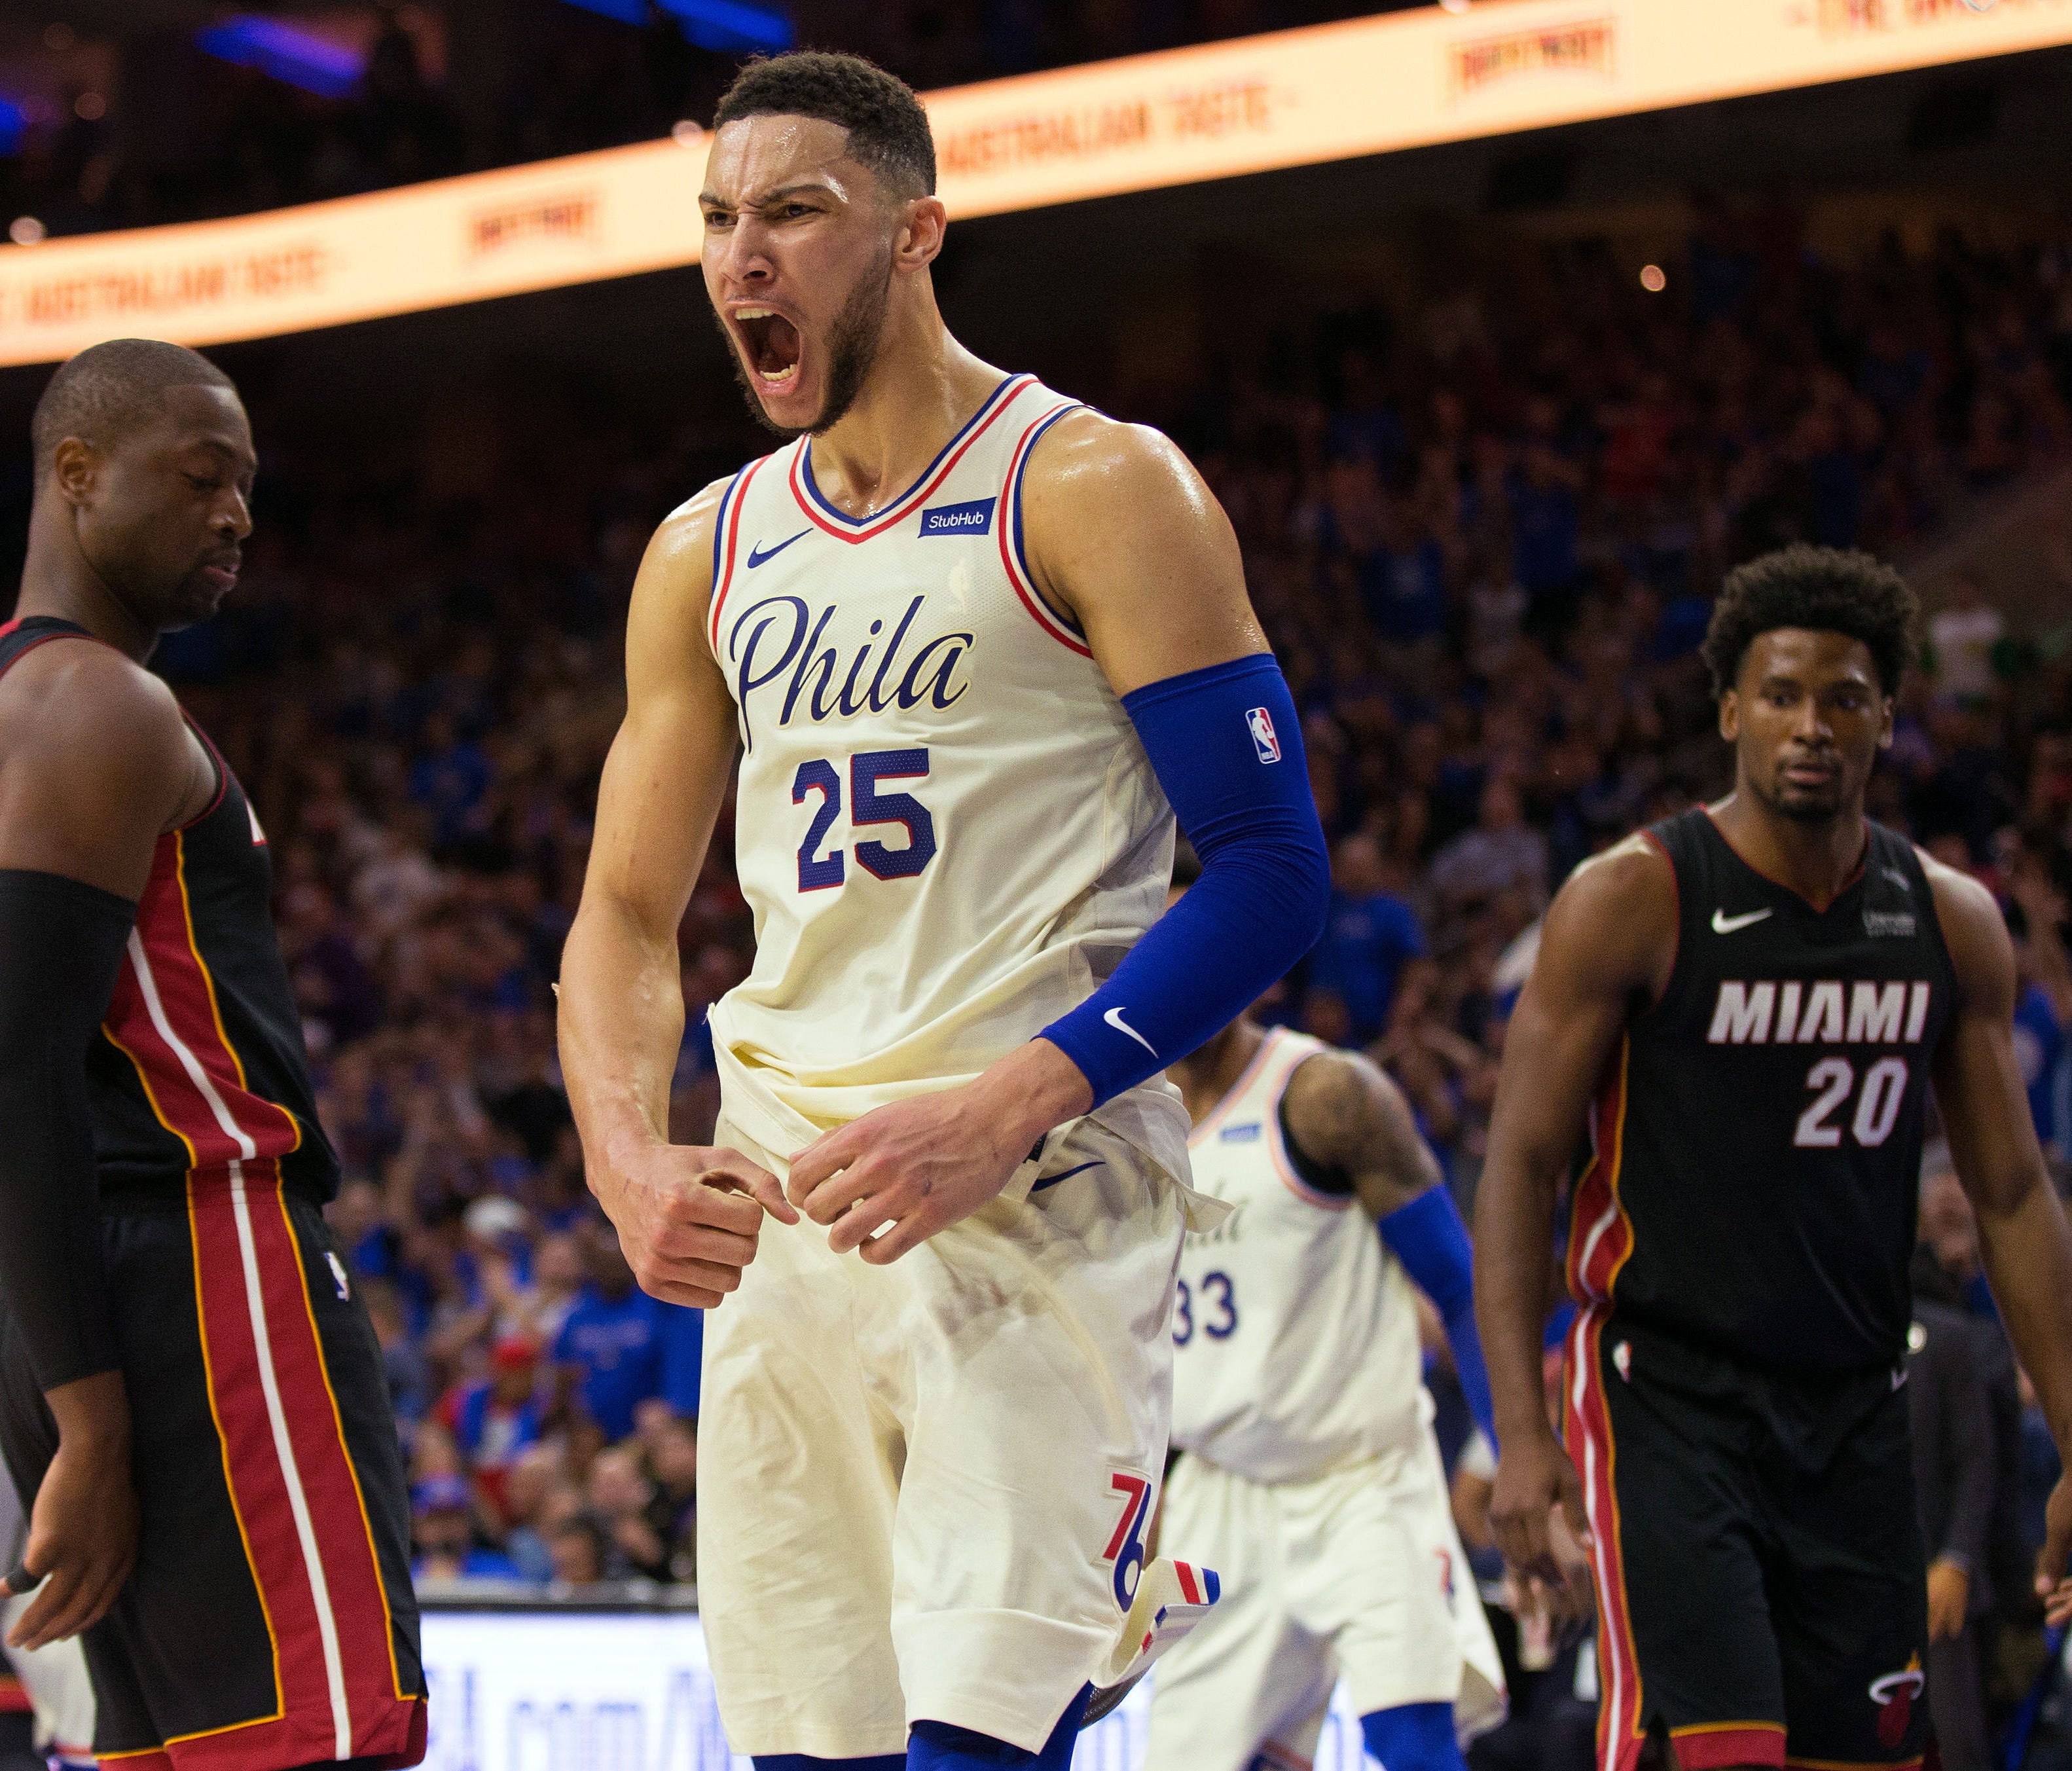 Philadelphia 76ers guard Ben Simmons (25) reacts in front of Miami Heat guard Dwyane Wade (3) and forward Justise Winslow (20) after hi dunk during the third quarter in game one of the first round of the 2018 NBA Playoffs at Wells Fargo Center.